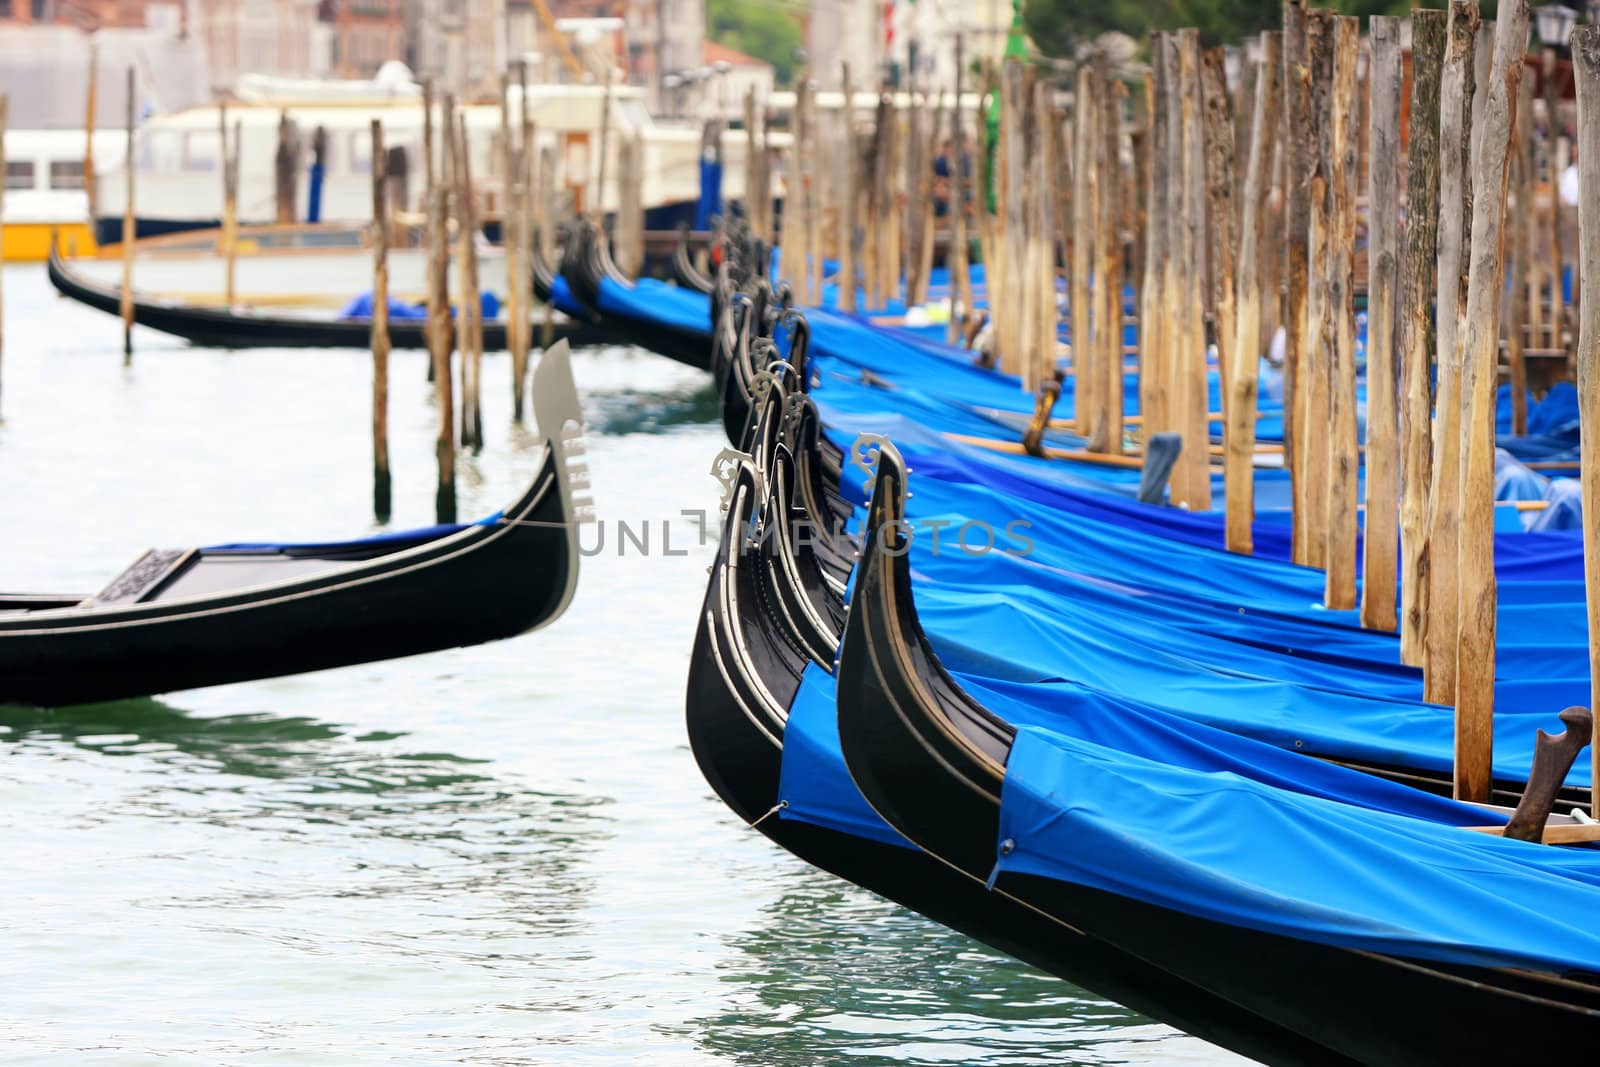 details of gondolas on water in Venice, Italy